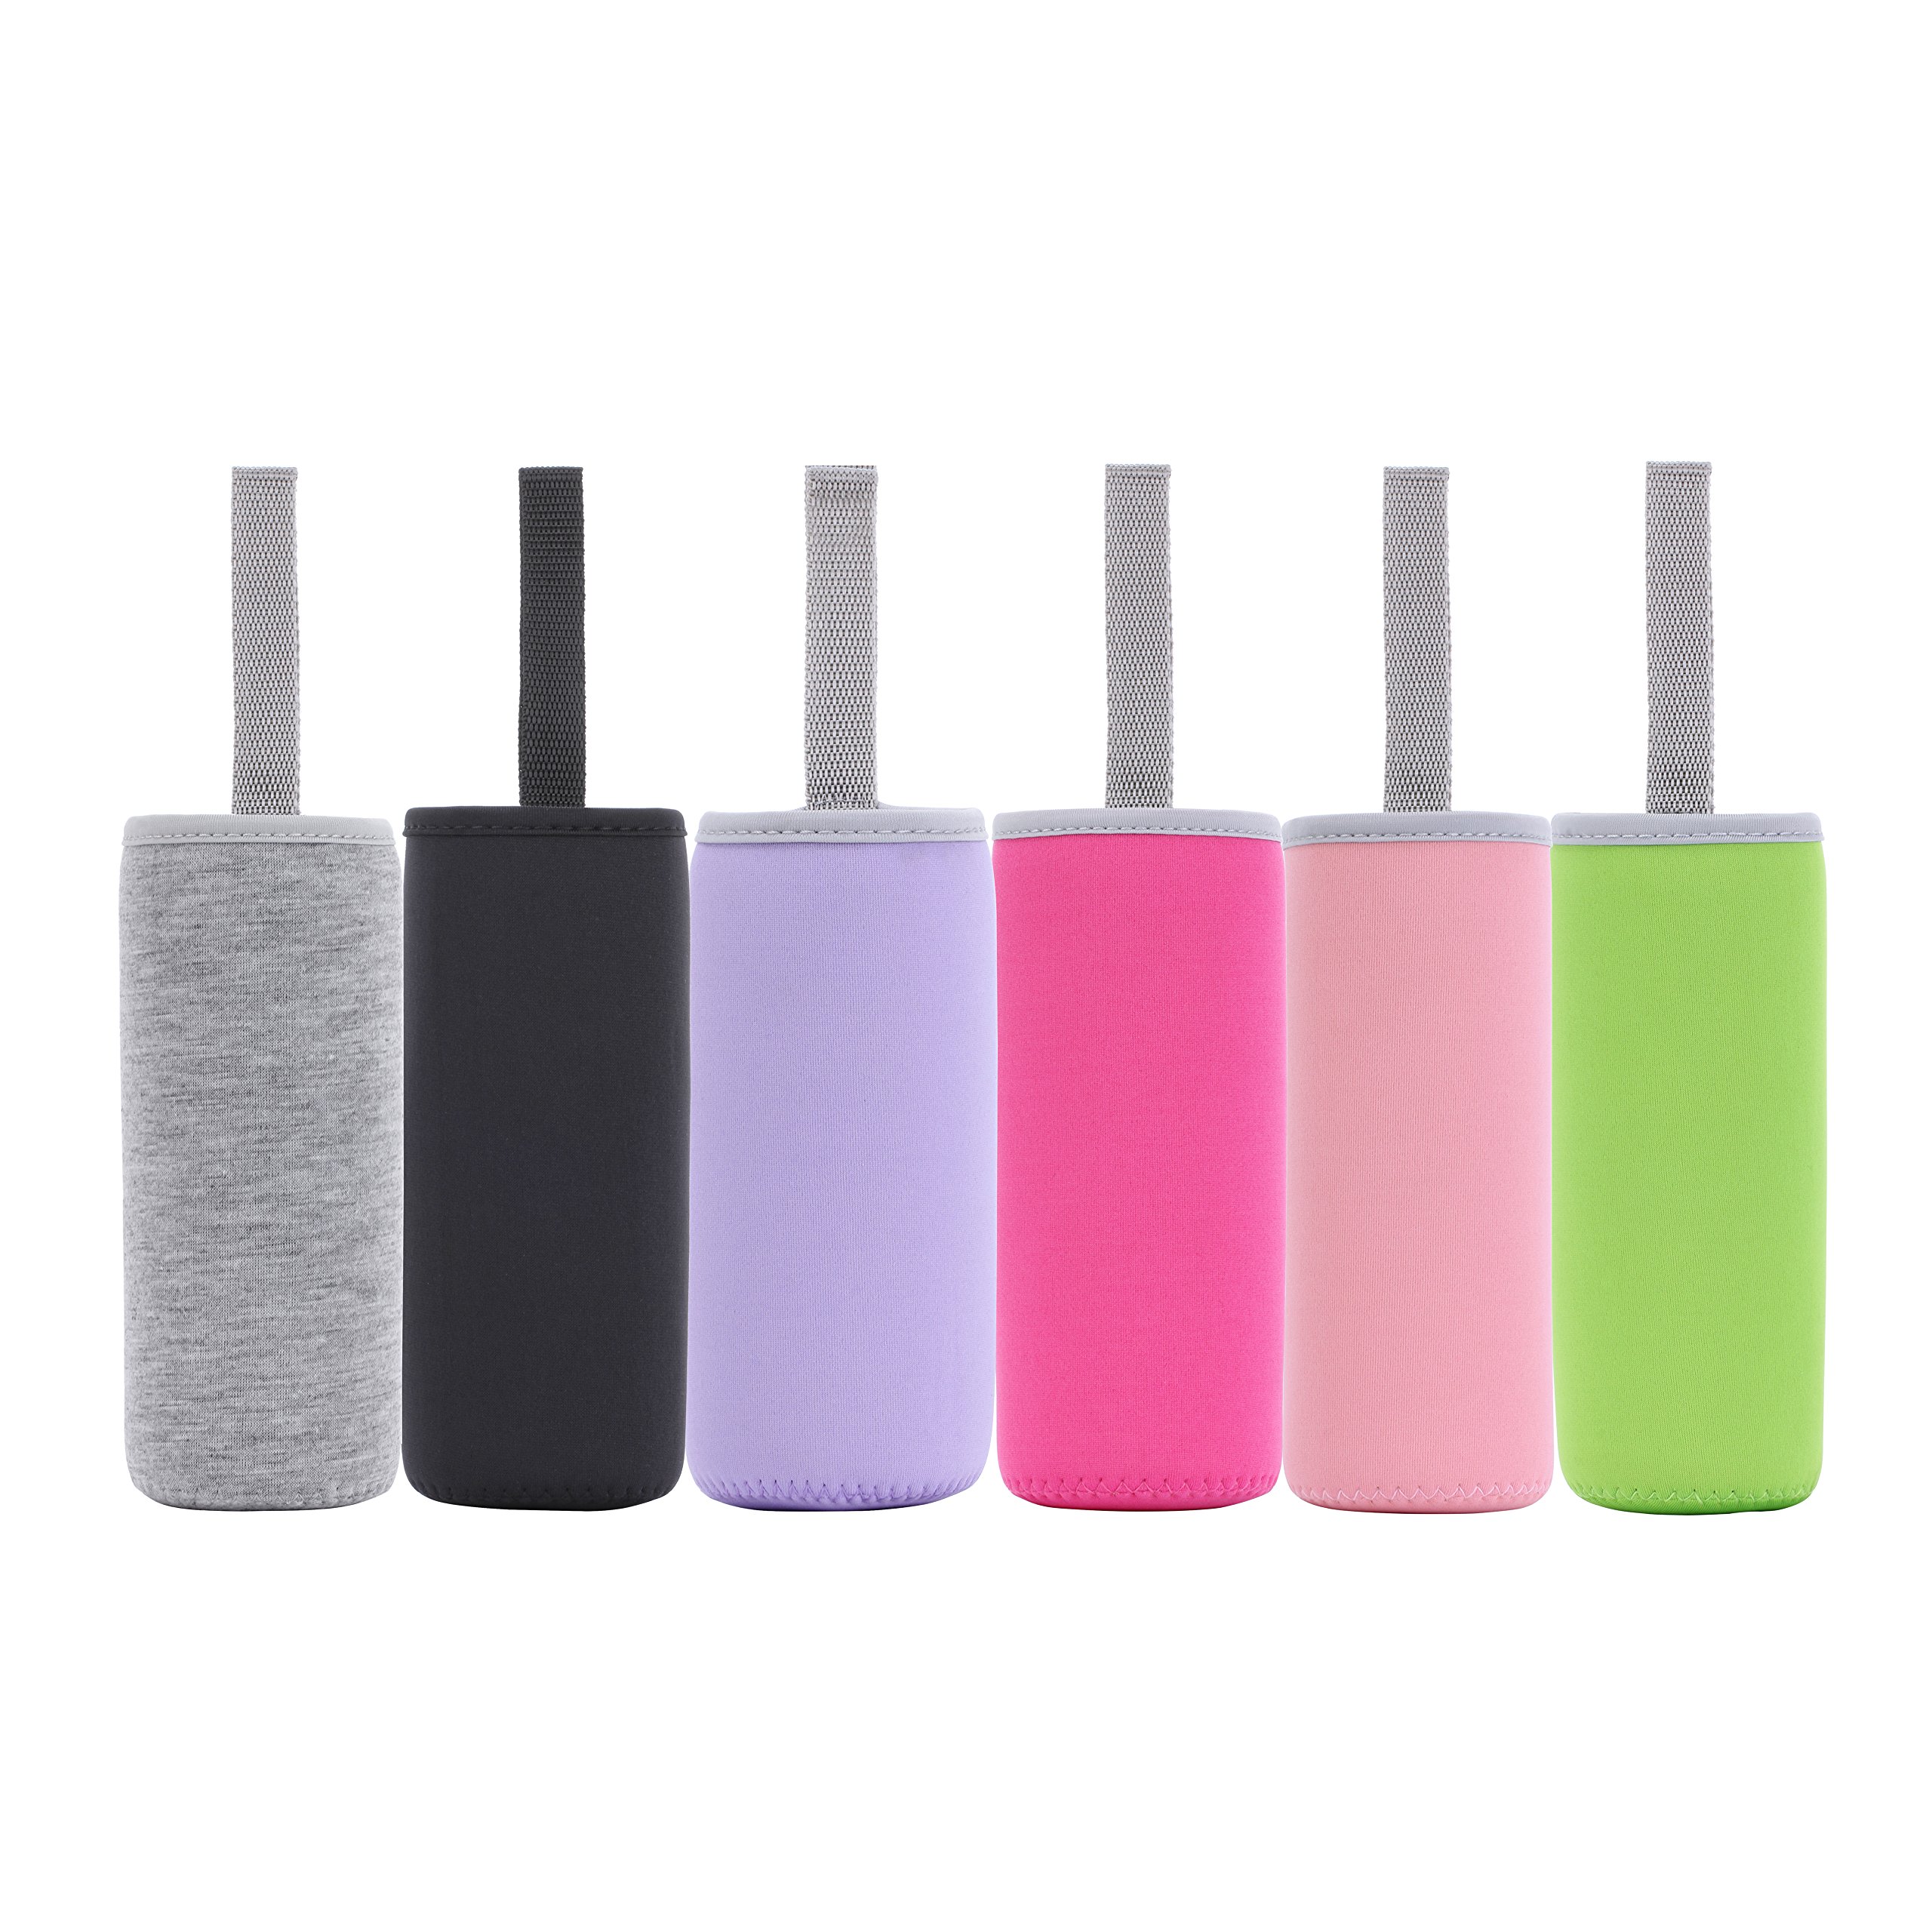 Neoprene Glass Water Bottle Sleeves Holders With Carry Straps Insulated Collapsible Drink Bottle Covers Carrier for Colder Or Hot 280ml/360ml/420ml/550ml PH93